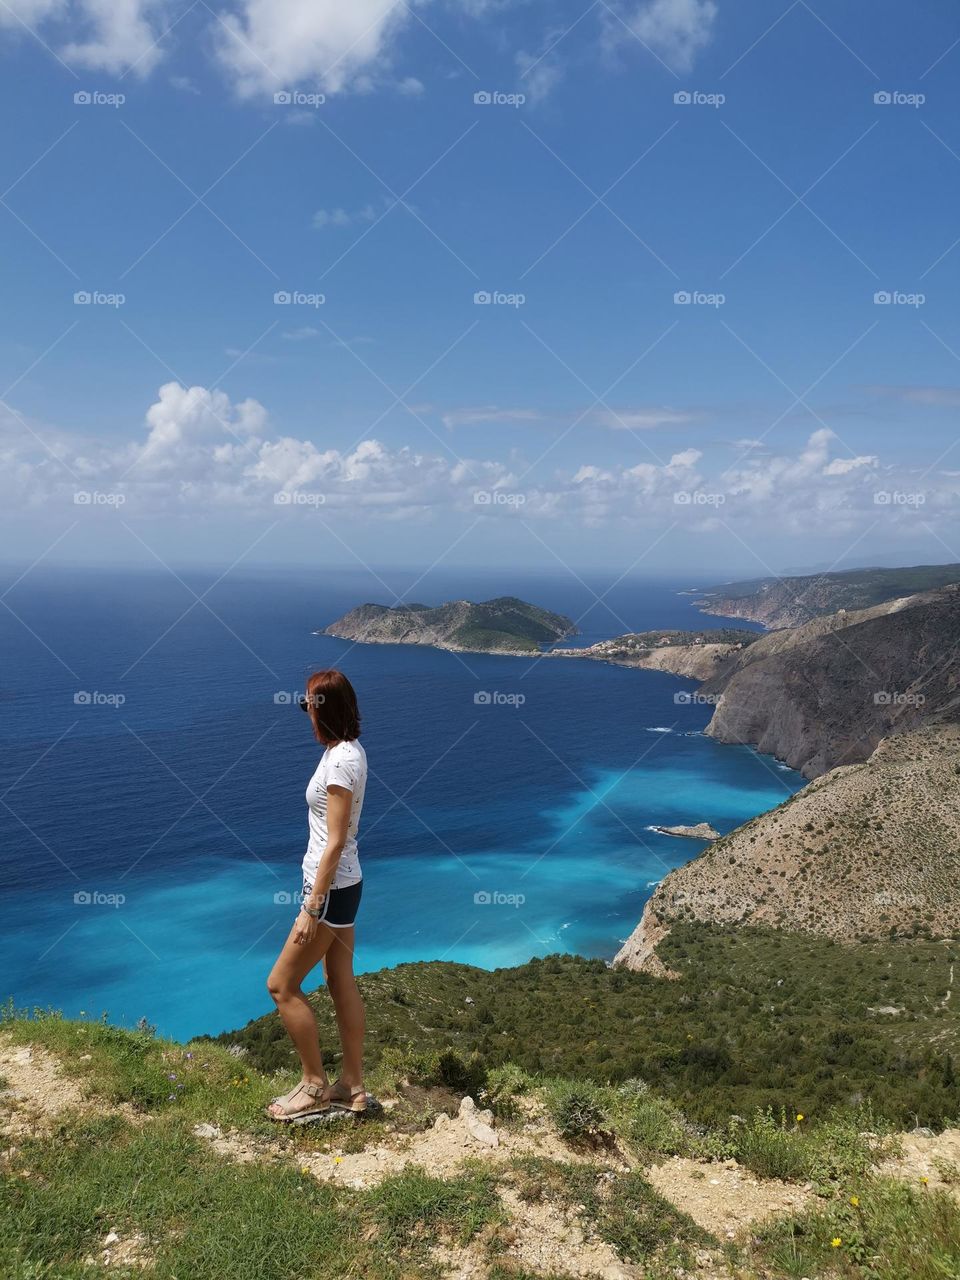 Let's go on a hike. Beautiful Kefalonia, amazing scenery, sunny weather and woman admire the blue sea...Without filters and digital retouching.